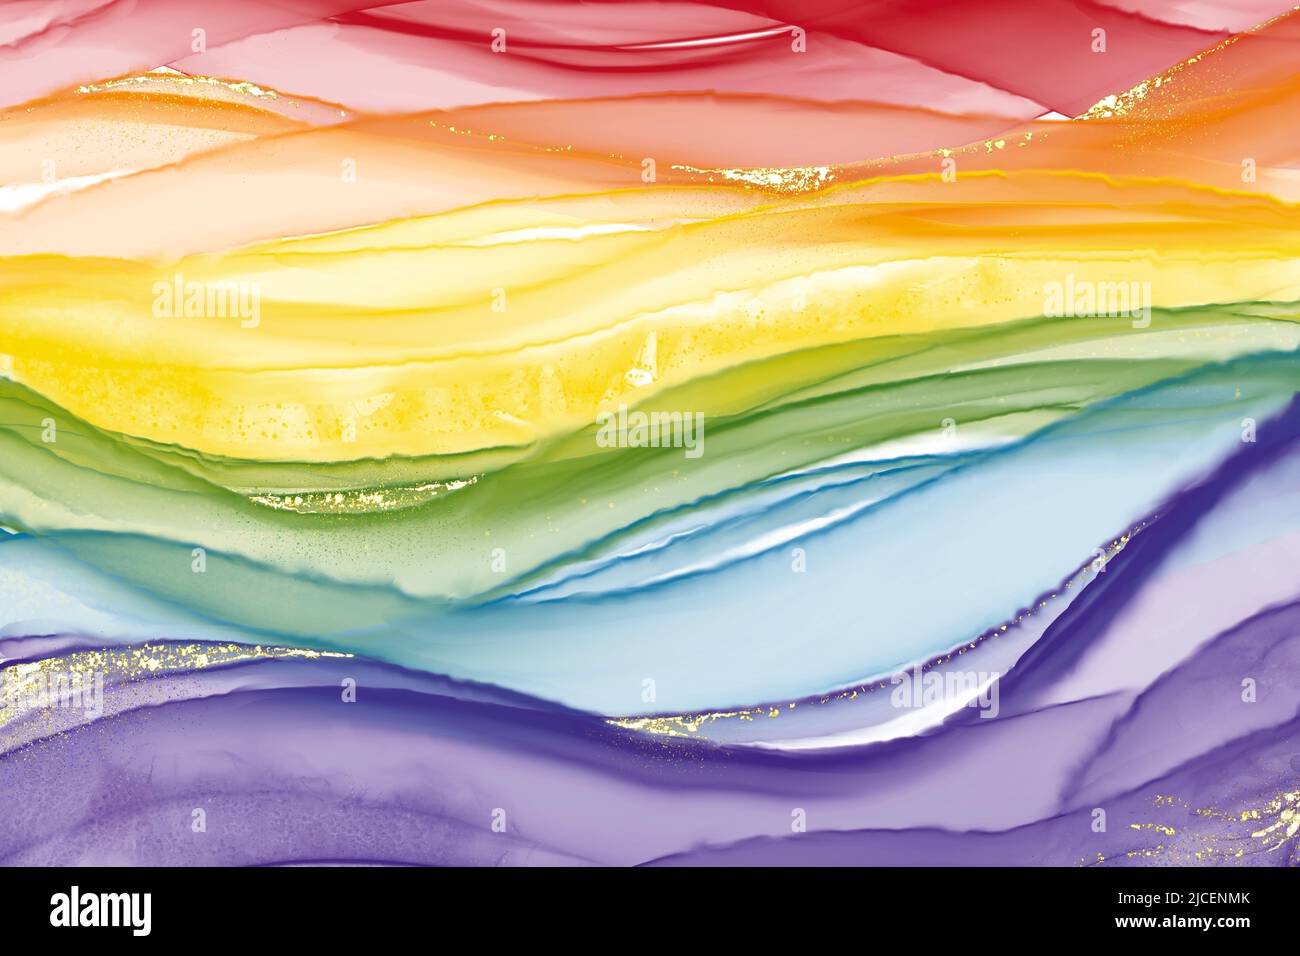 Rainbow line abstract background art painting decorated with gold flow drop. Alcohol ink, watercolor style, LGBTQ community pride concept. Stock Photo